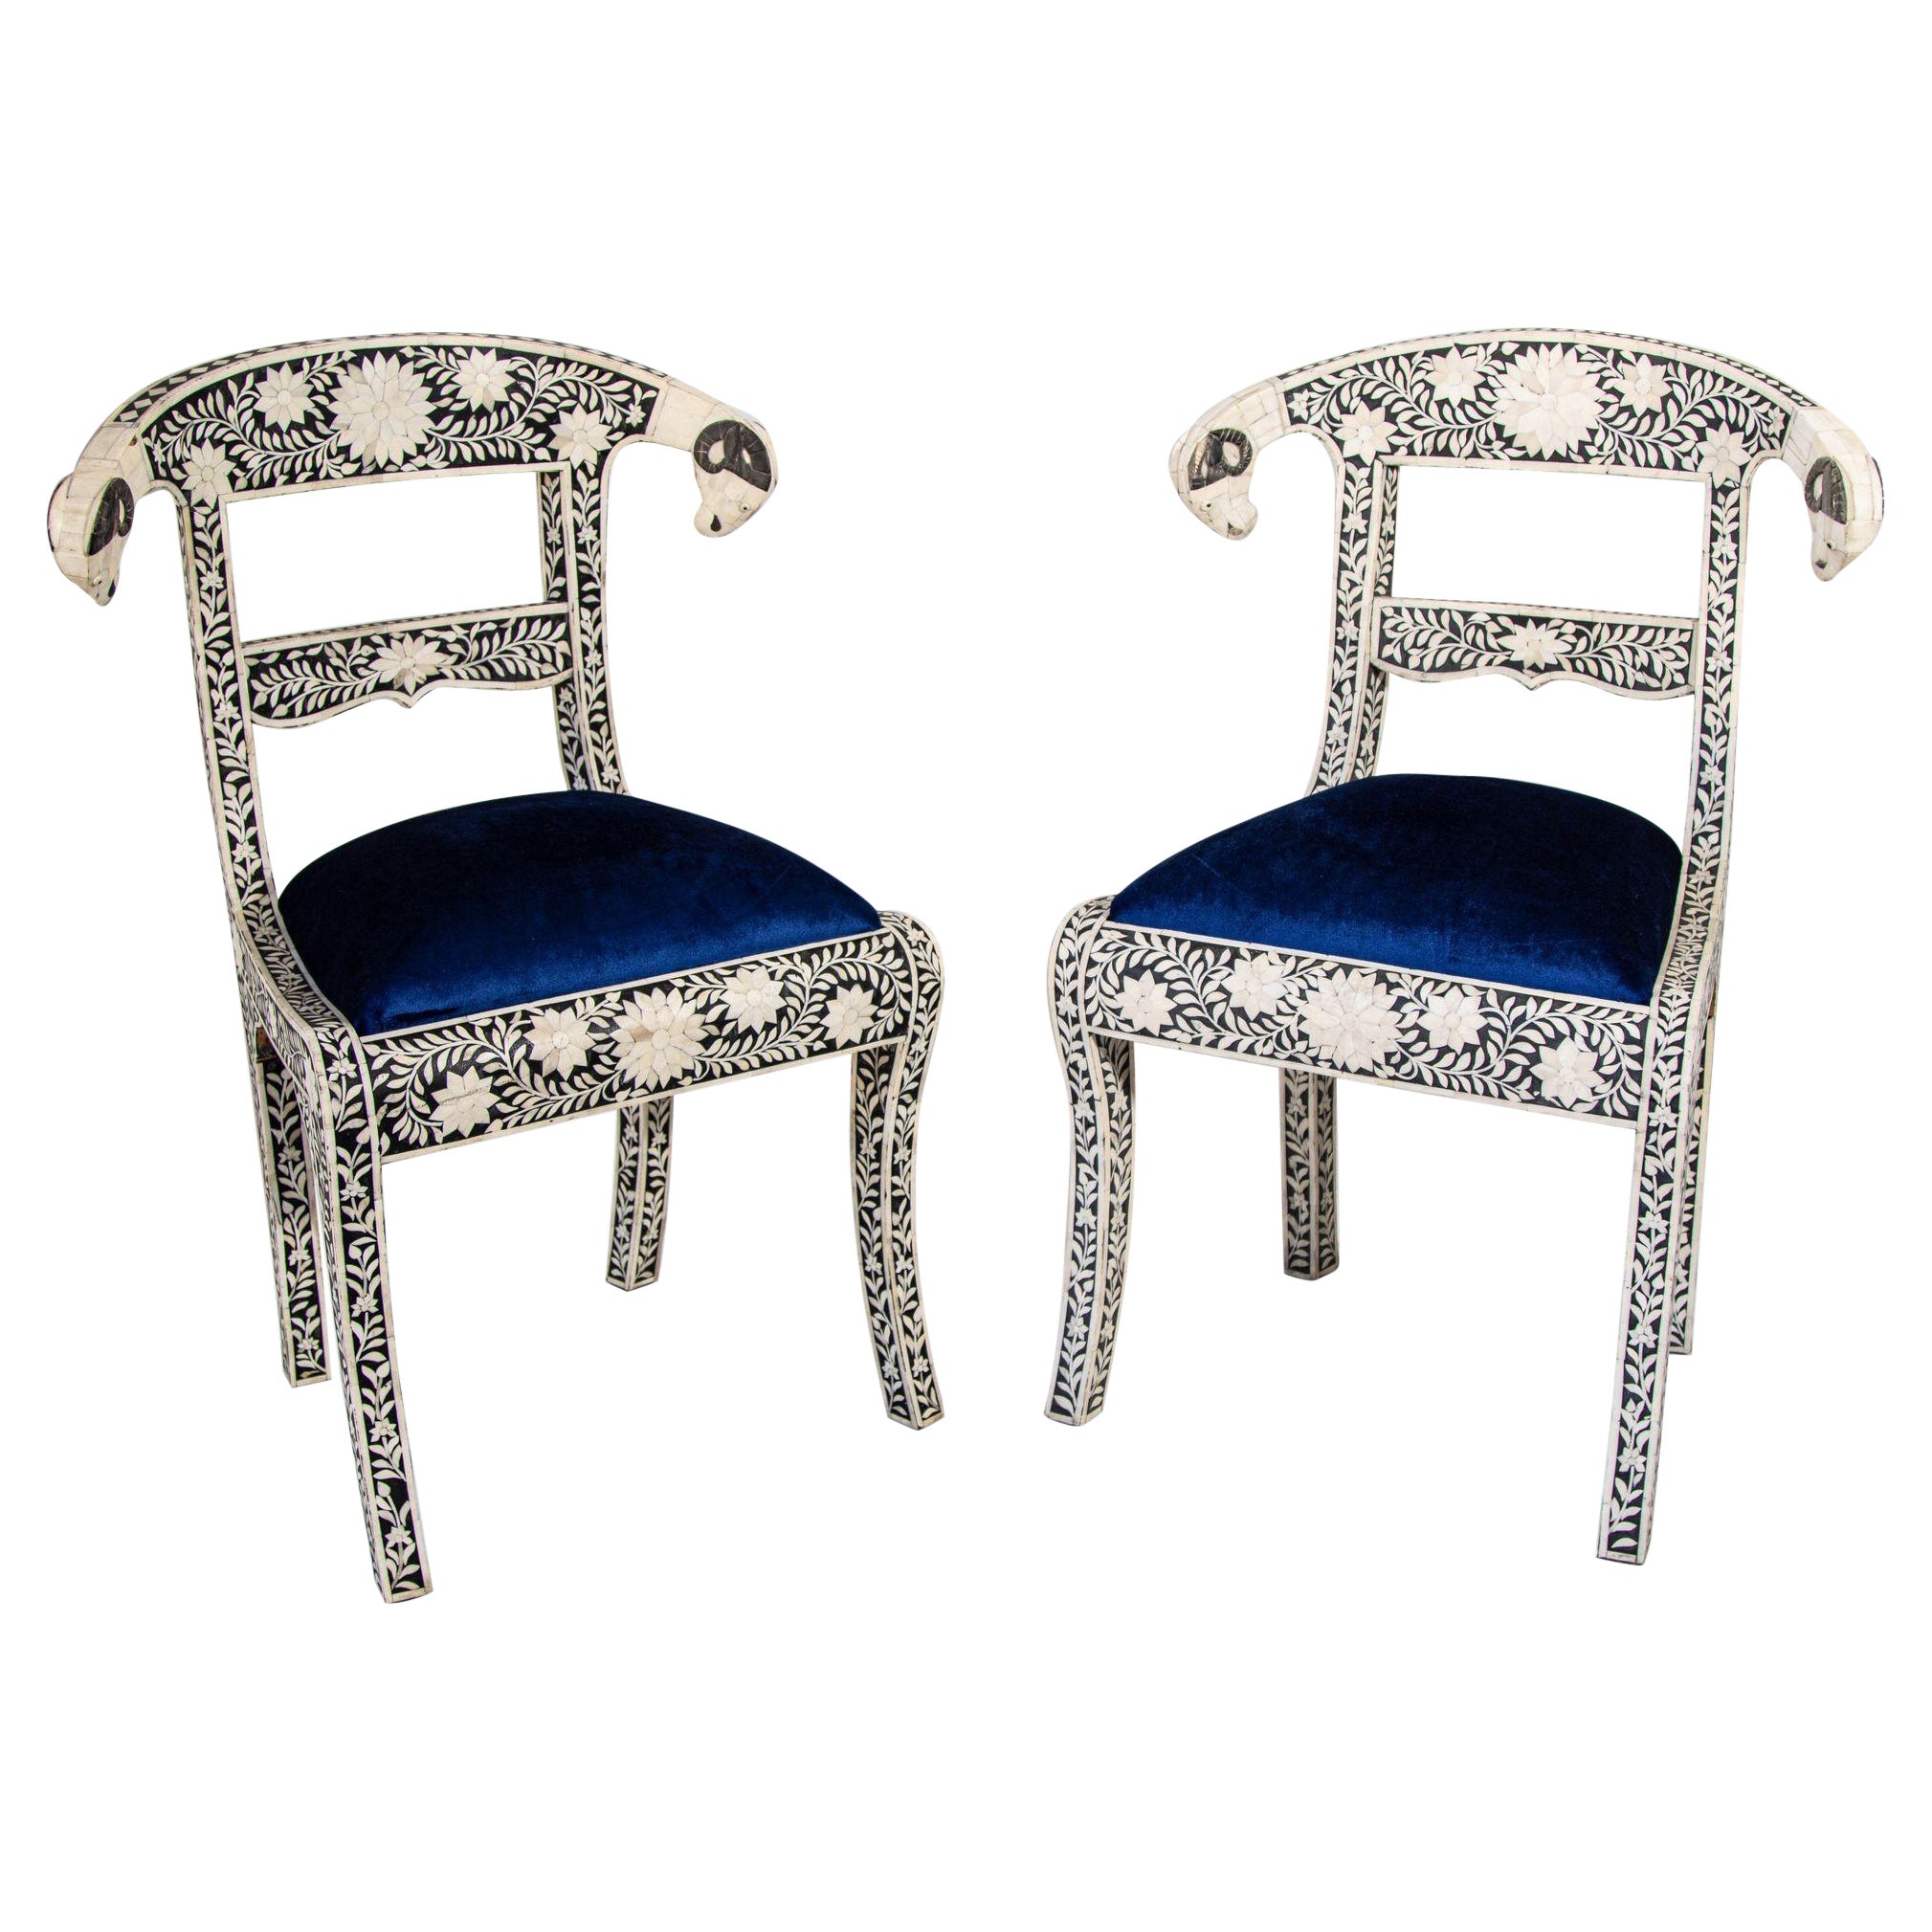 Antique Anglo-Indian Side Chairs with Ram's Head Bone Inlay Royal Blue Seat Pair For Sale